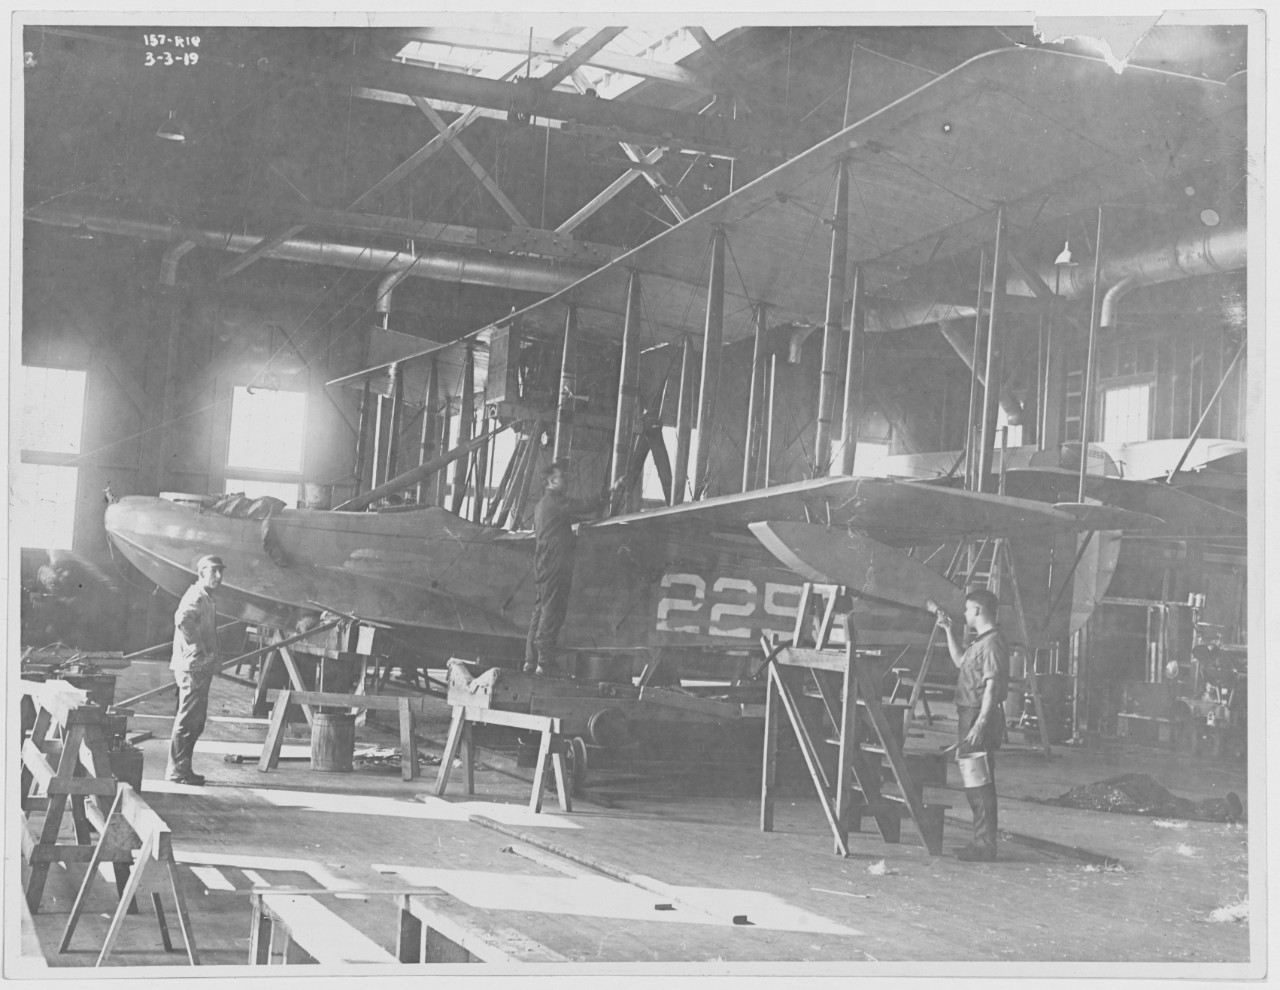 Repairing H-Boat at Gallandet Factory. March 3, 1919. U.S. Naval Air Station, Cape May, New Jersey